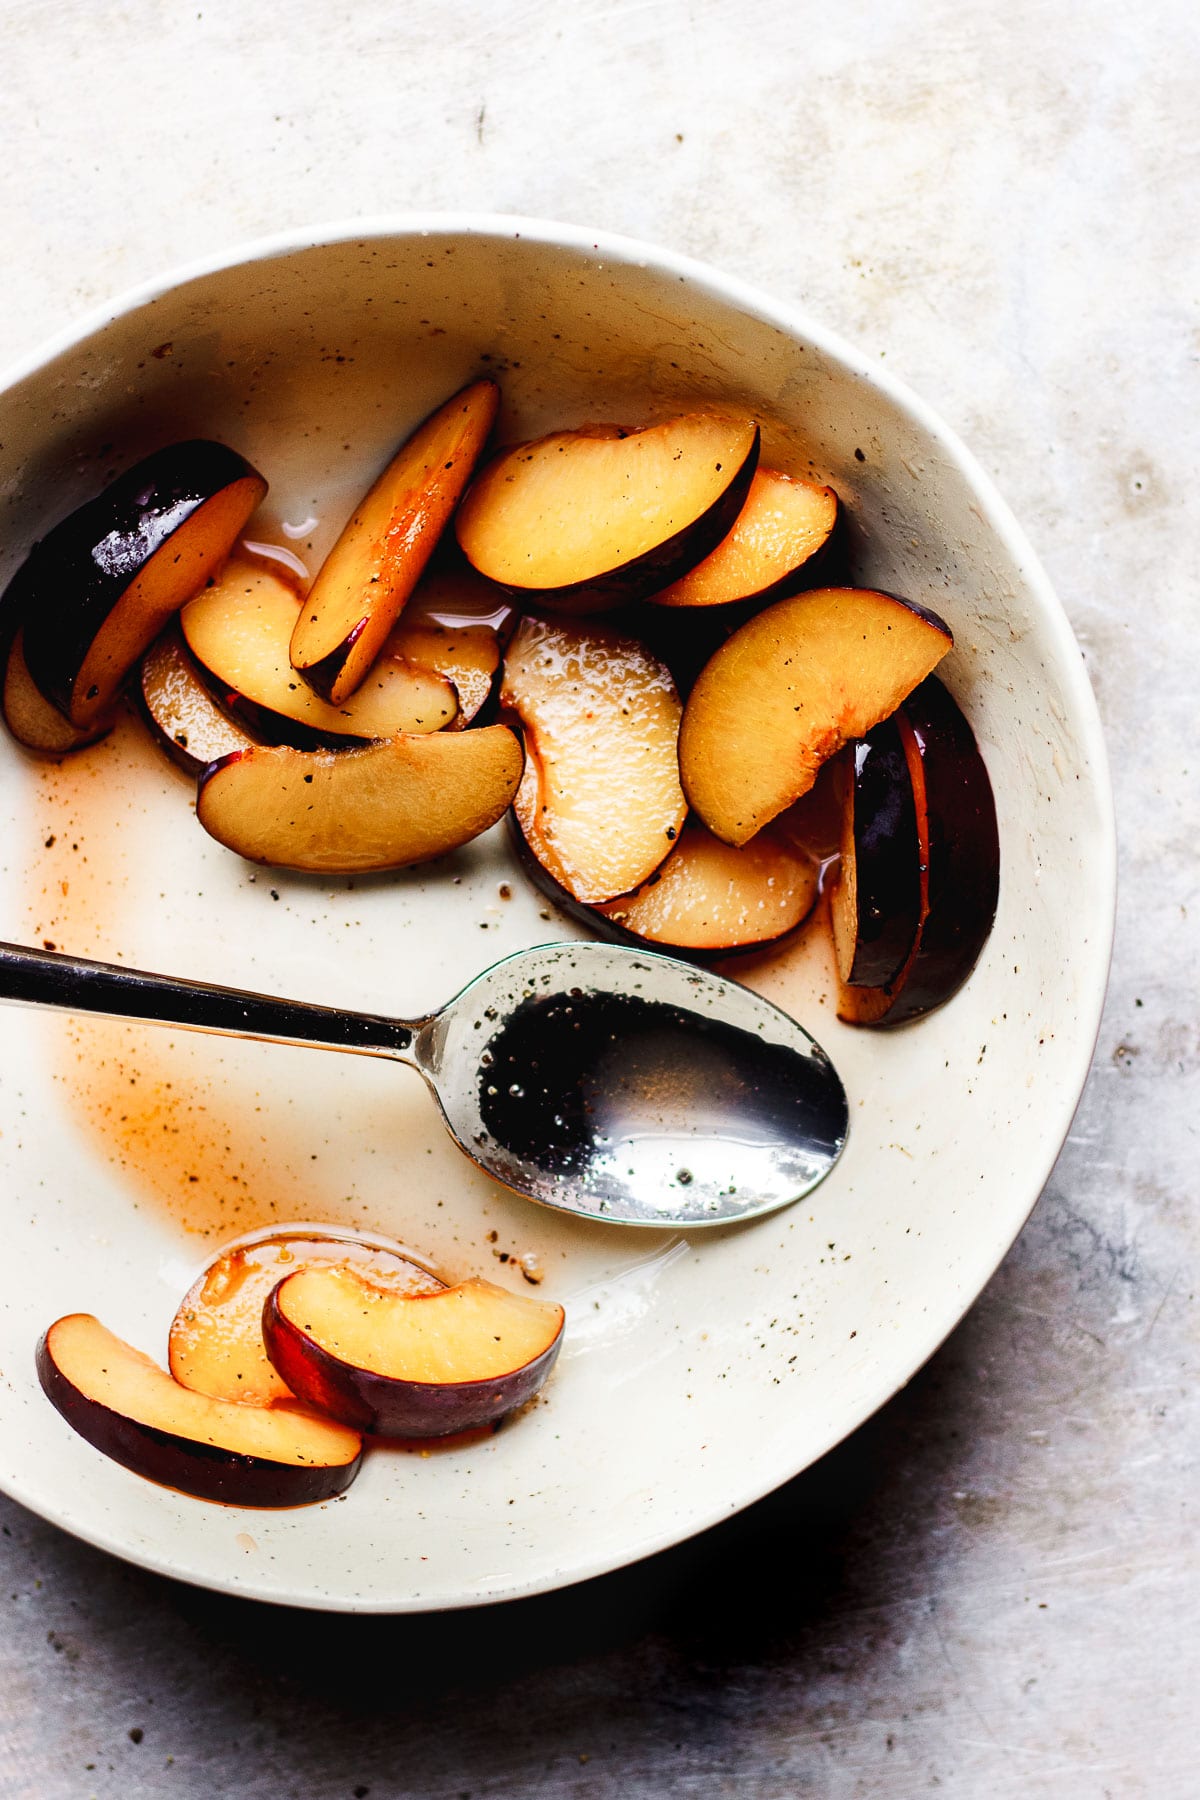 SALT AND PEPPER PLUMS WITH HONEY